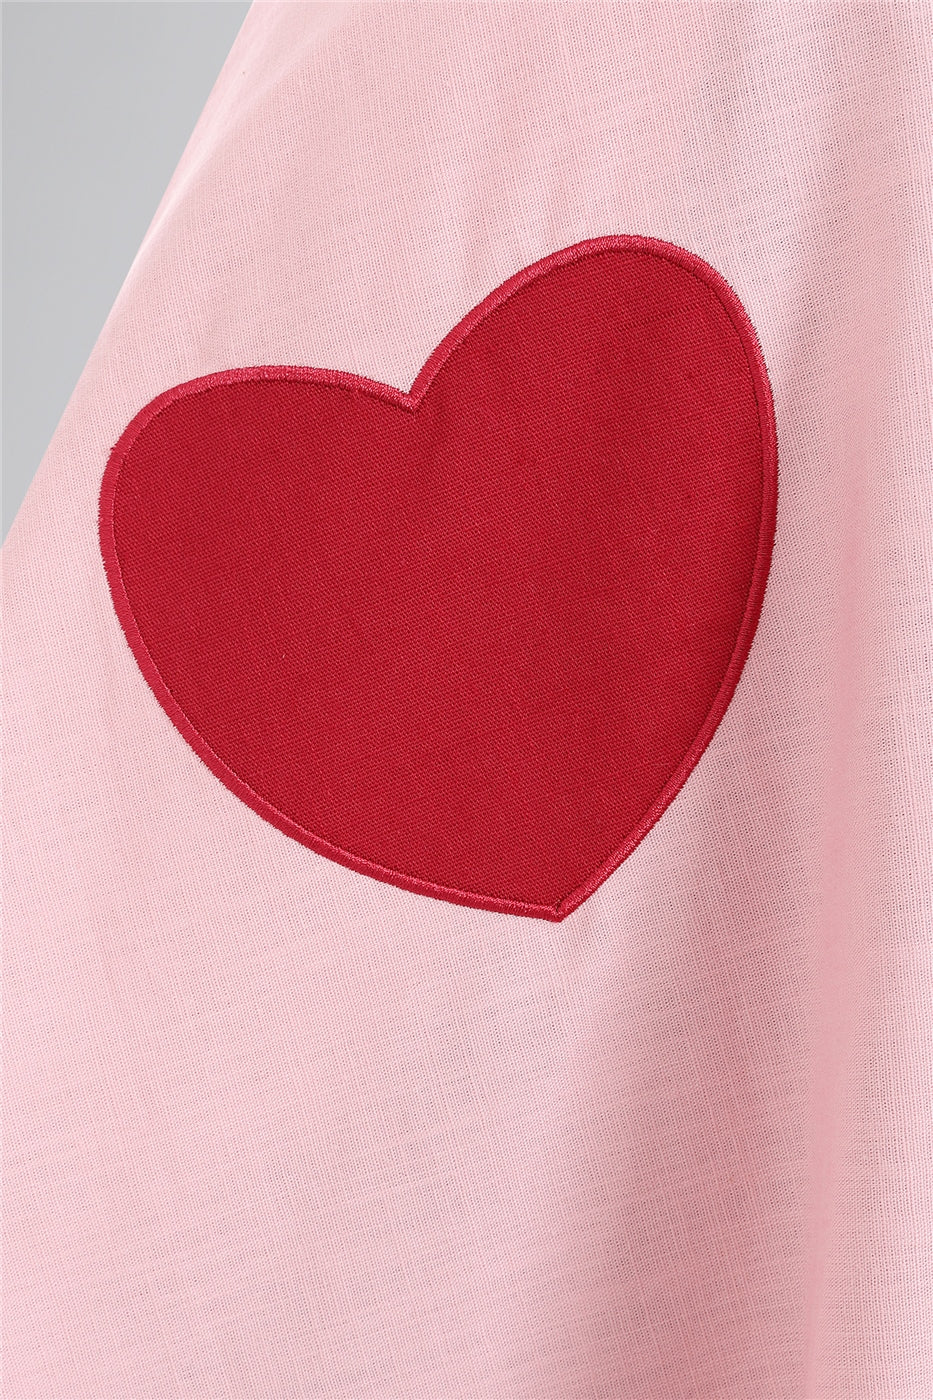 Close up of the red heart motif